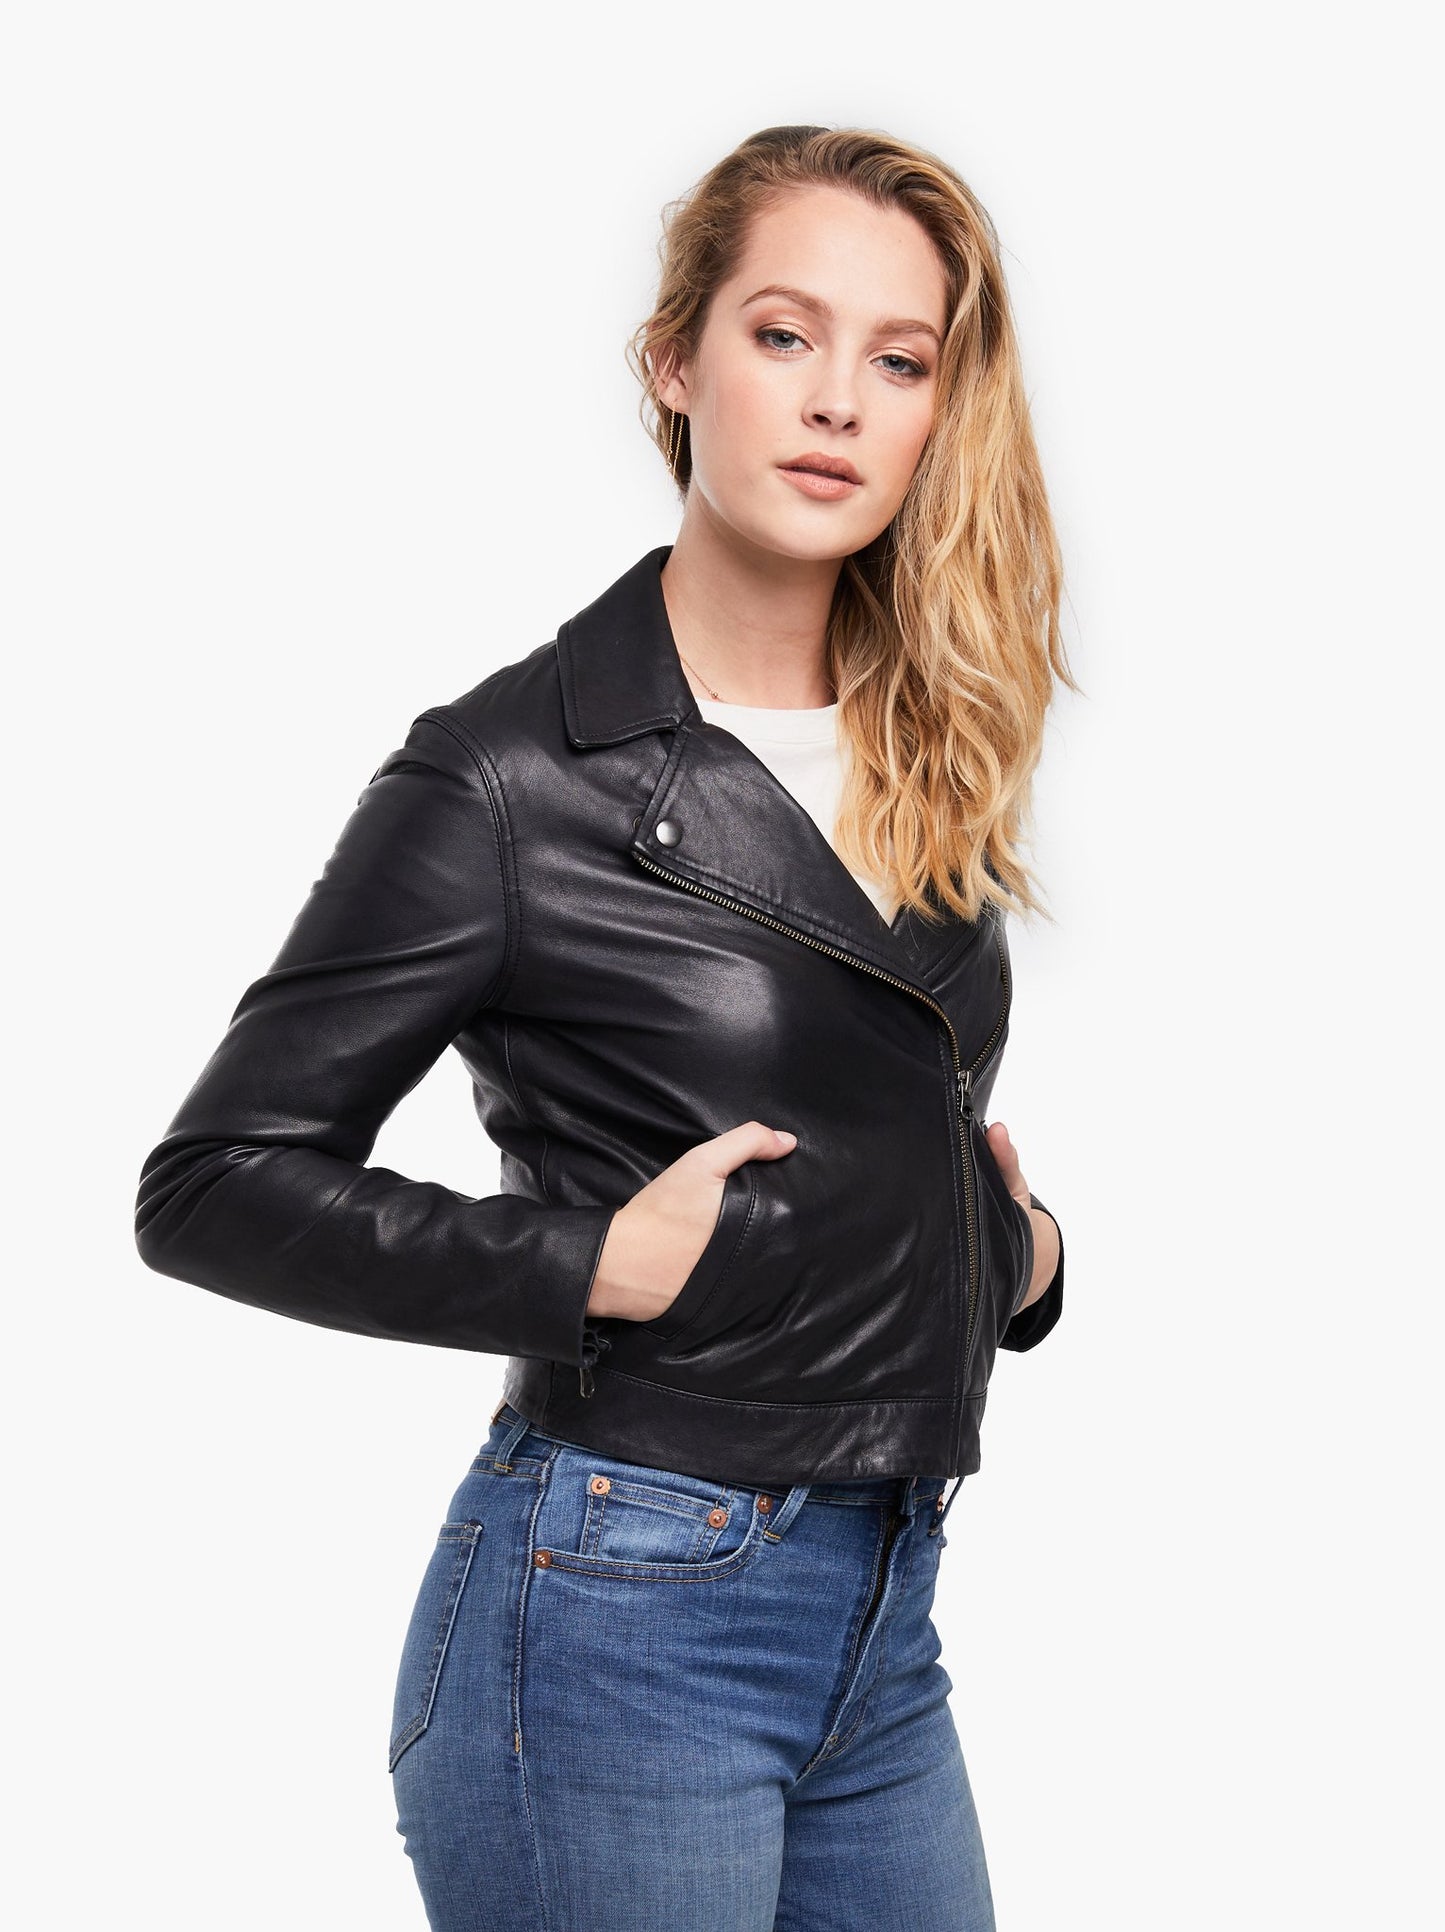 Able Maha Leather Jacket in Black Outerwear in Black at Wrapsody